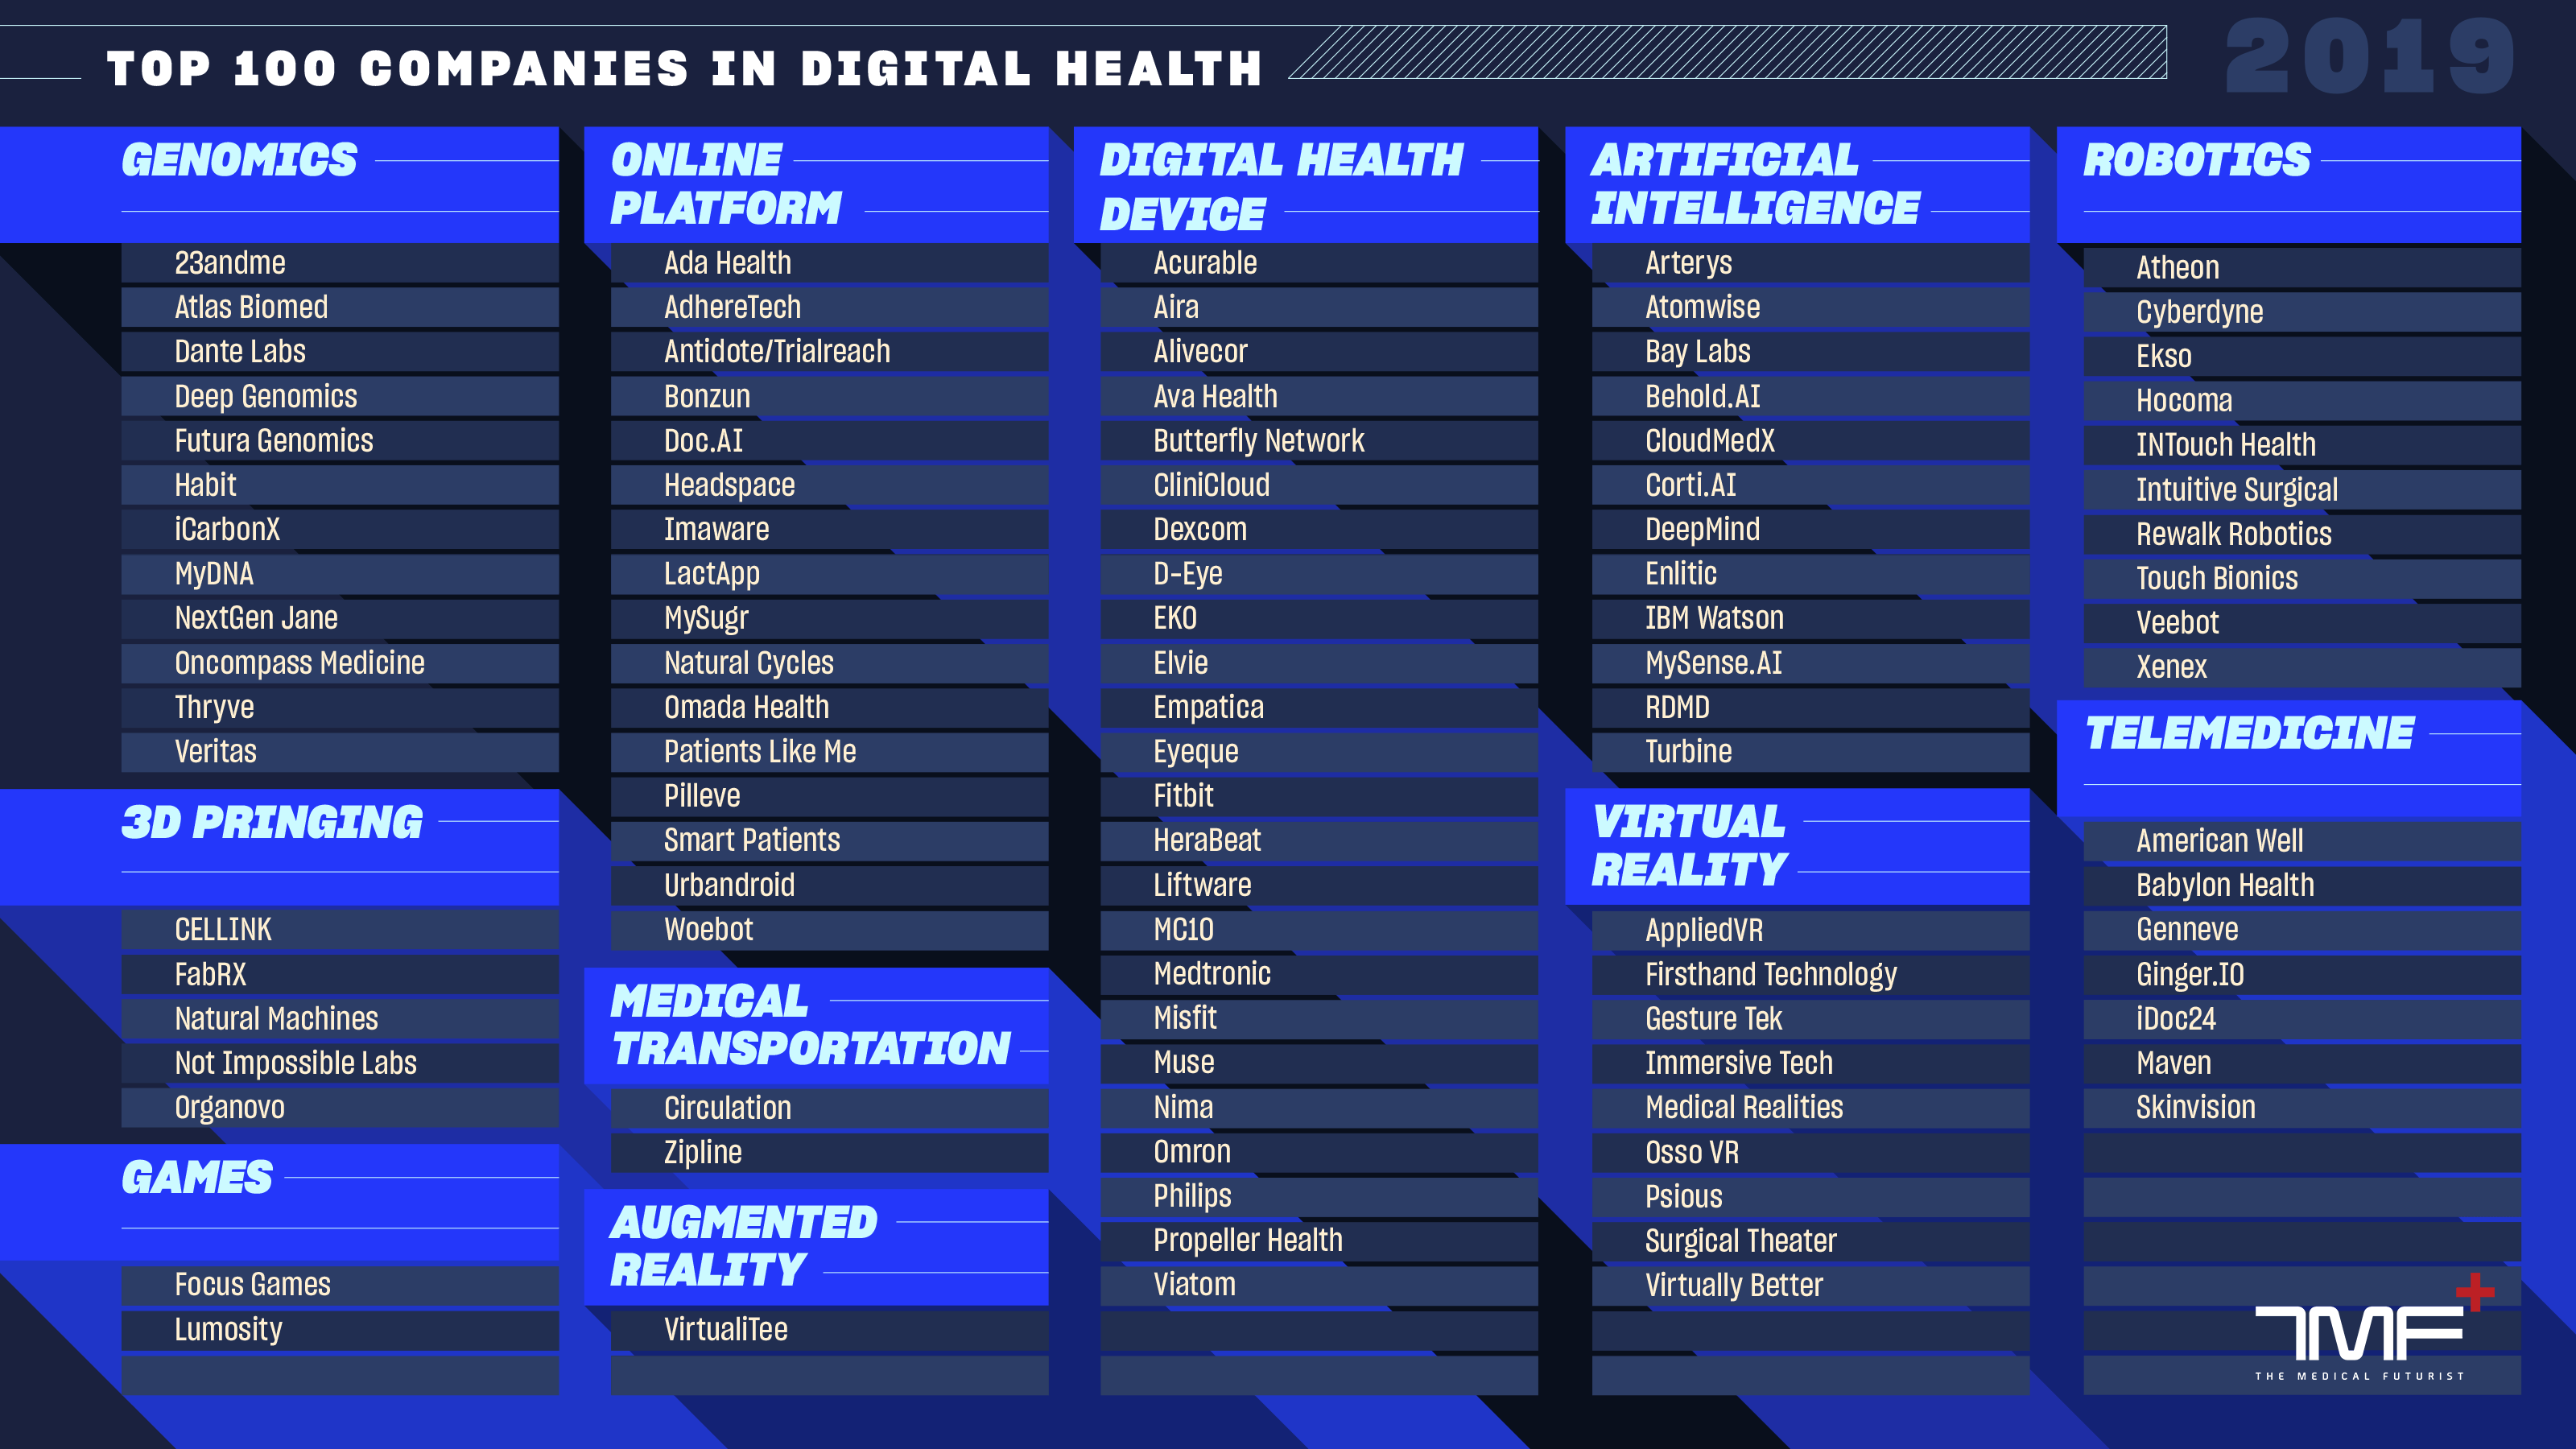 The Top 100 Companies In Digital Health Addressing RealWorld Needs